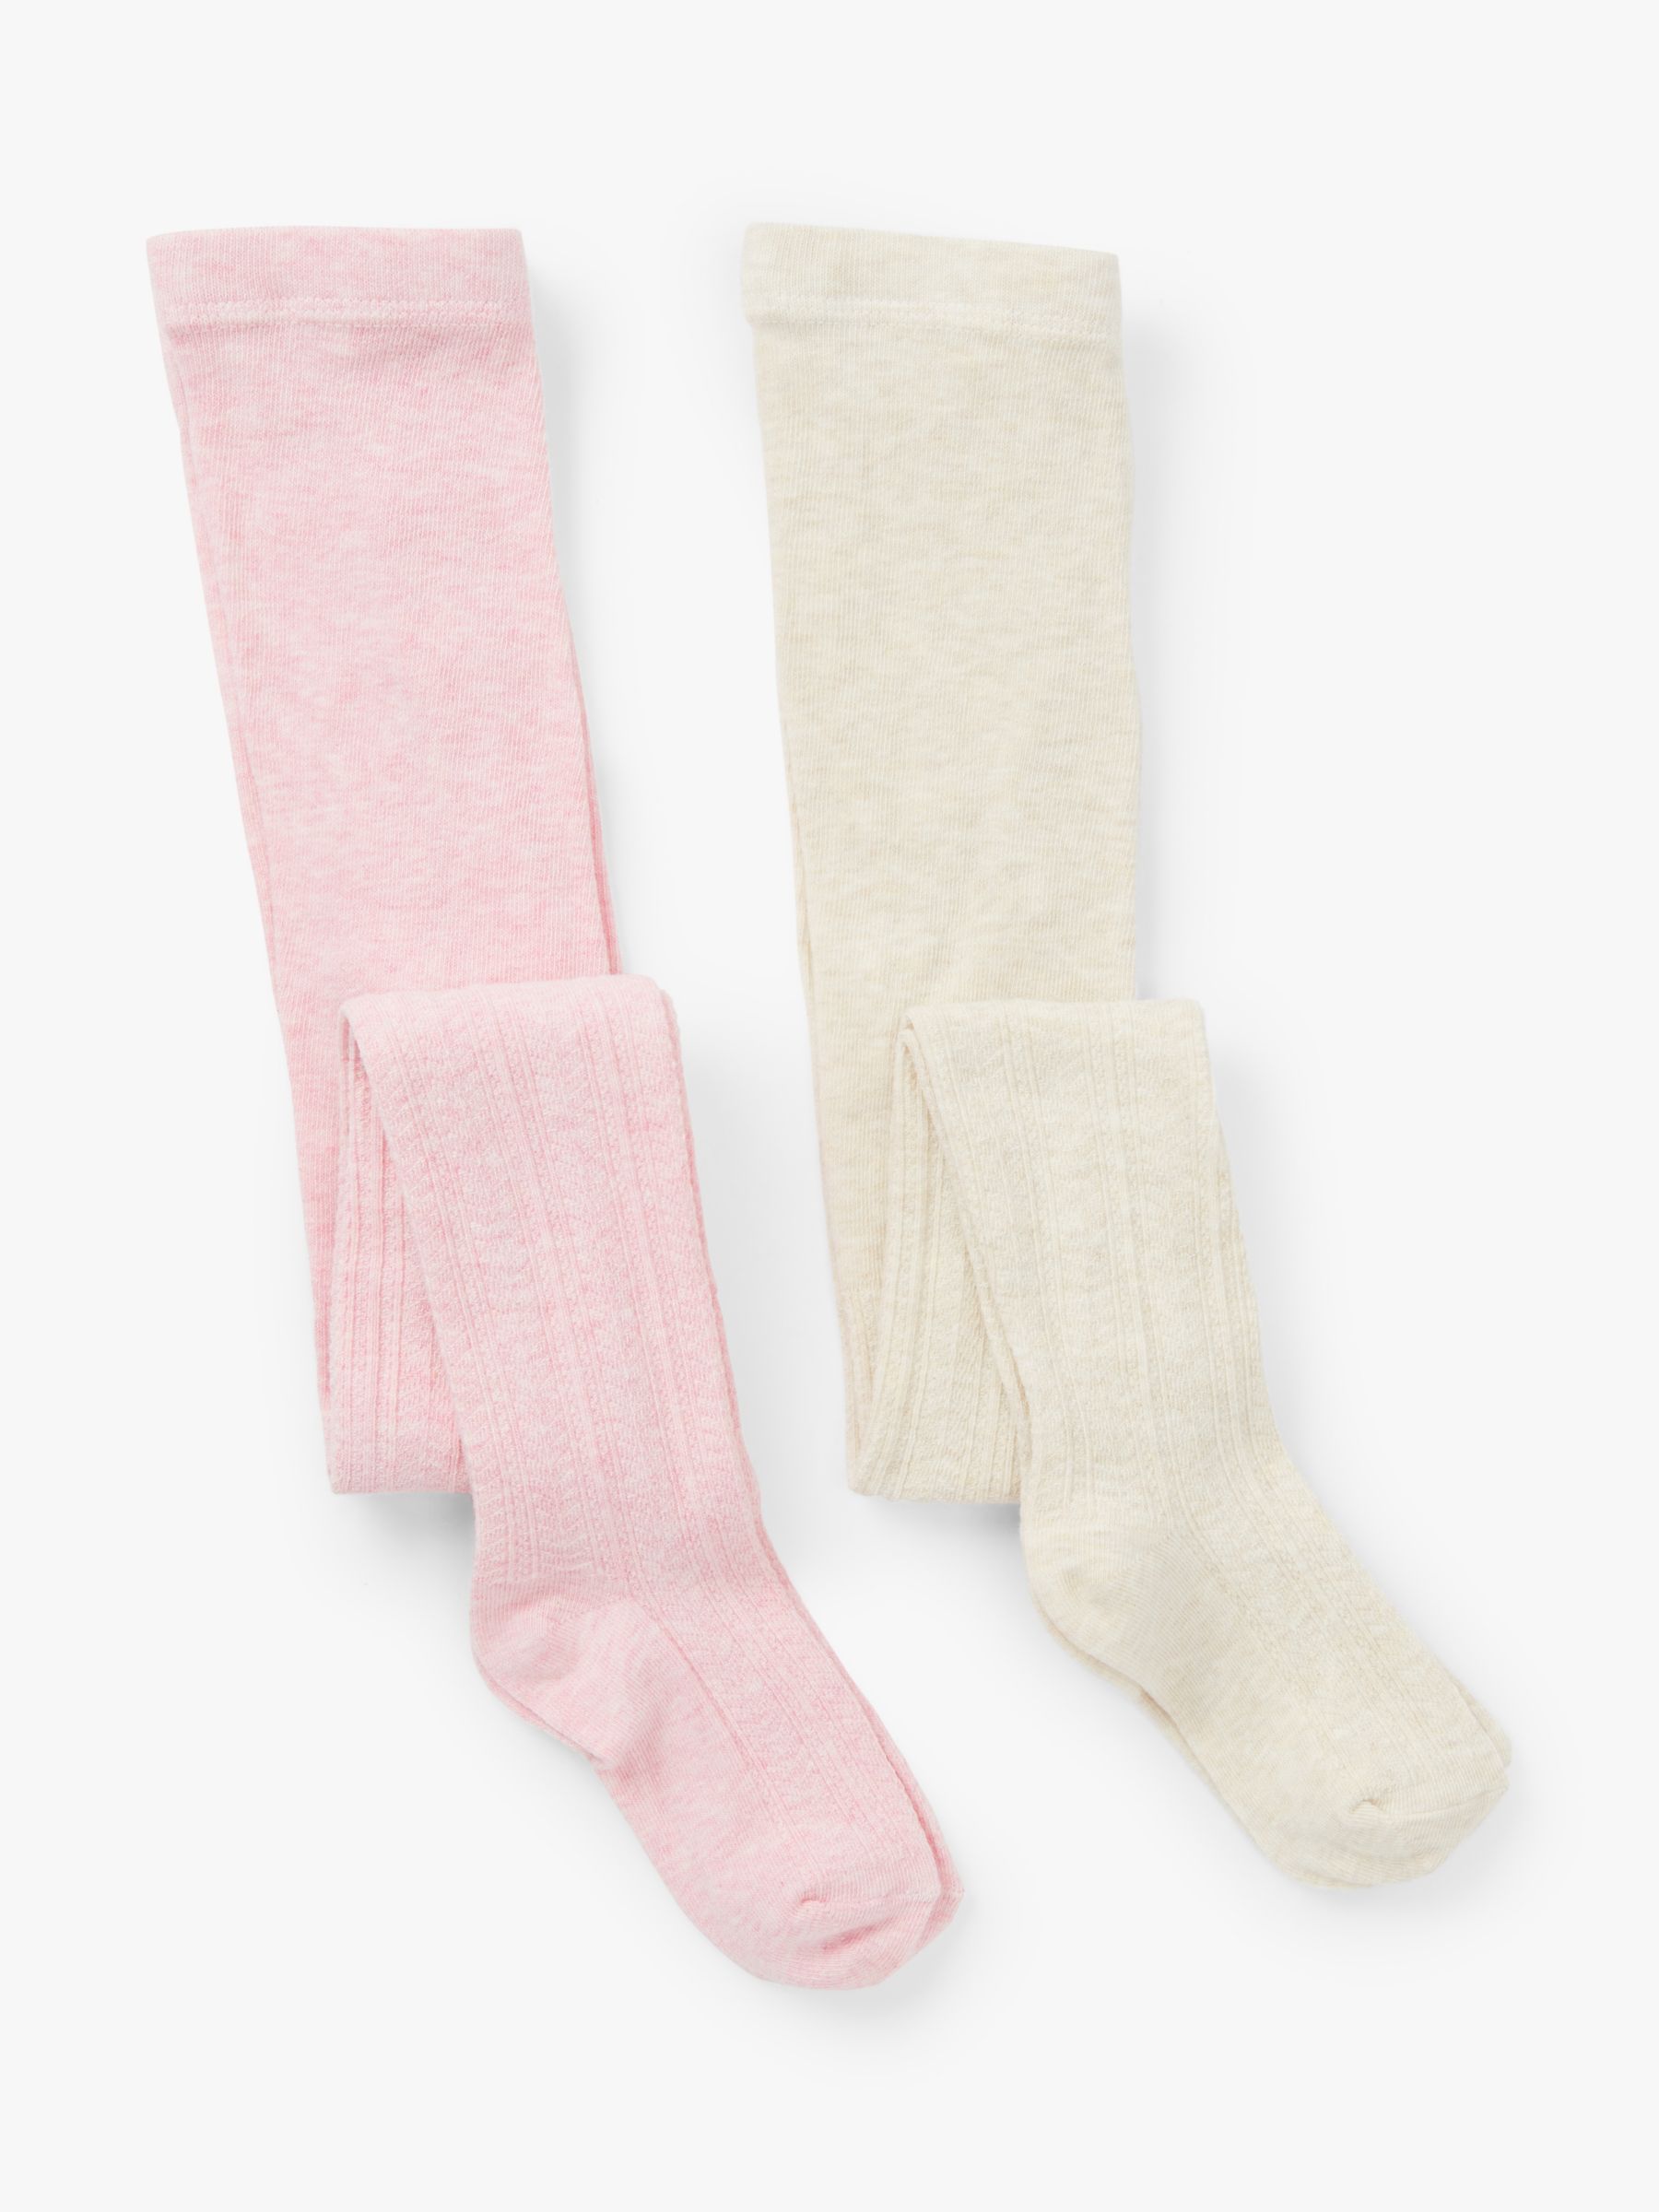 John Lewis Kids' Cable Knit Tights, Pack of 2, Pink/Cream